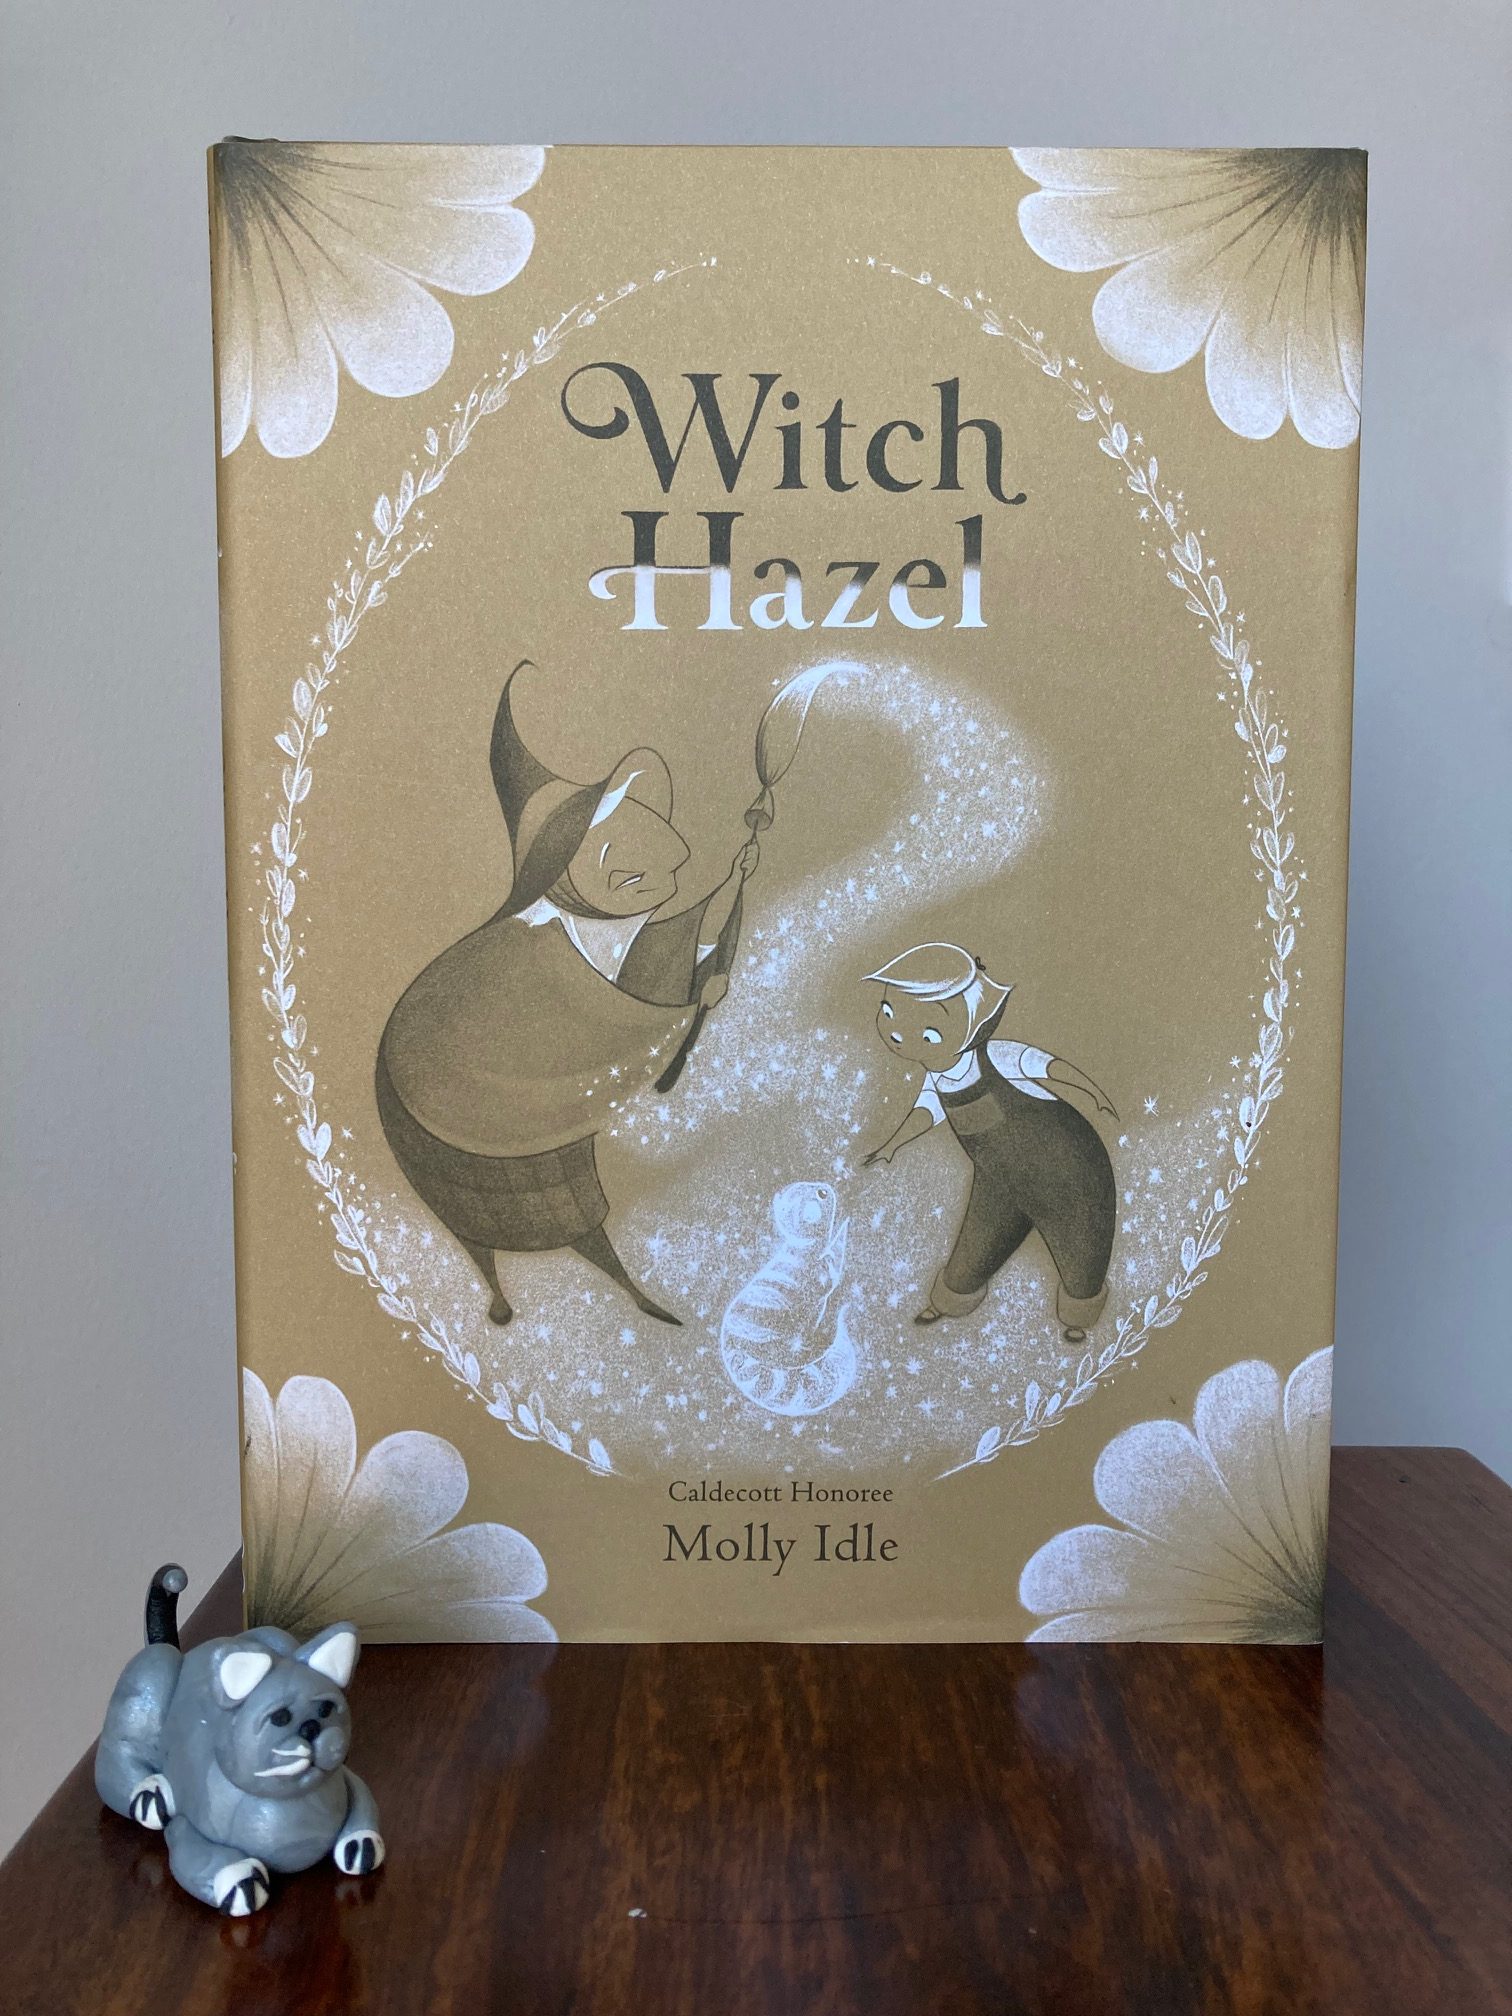 picture book Witch Hazel by Molly Idle, with a small grey fimo cat beside the book